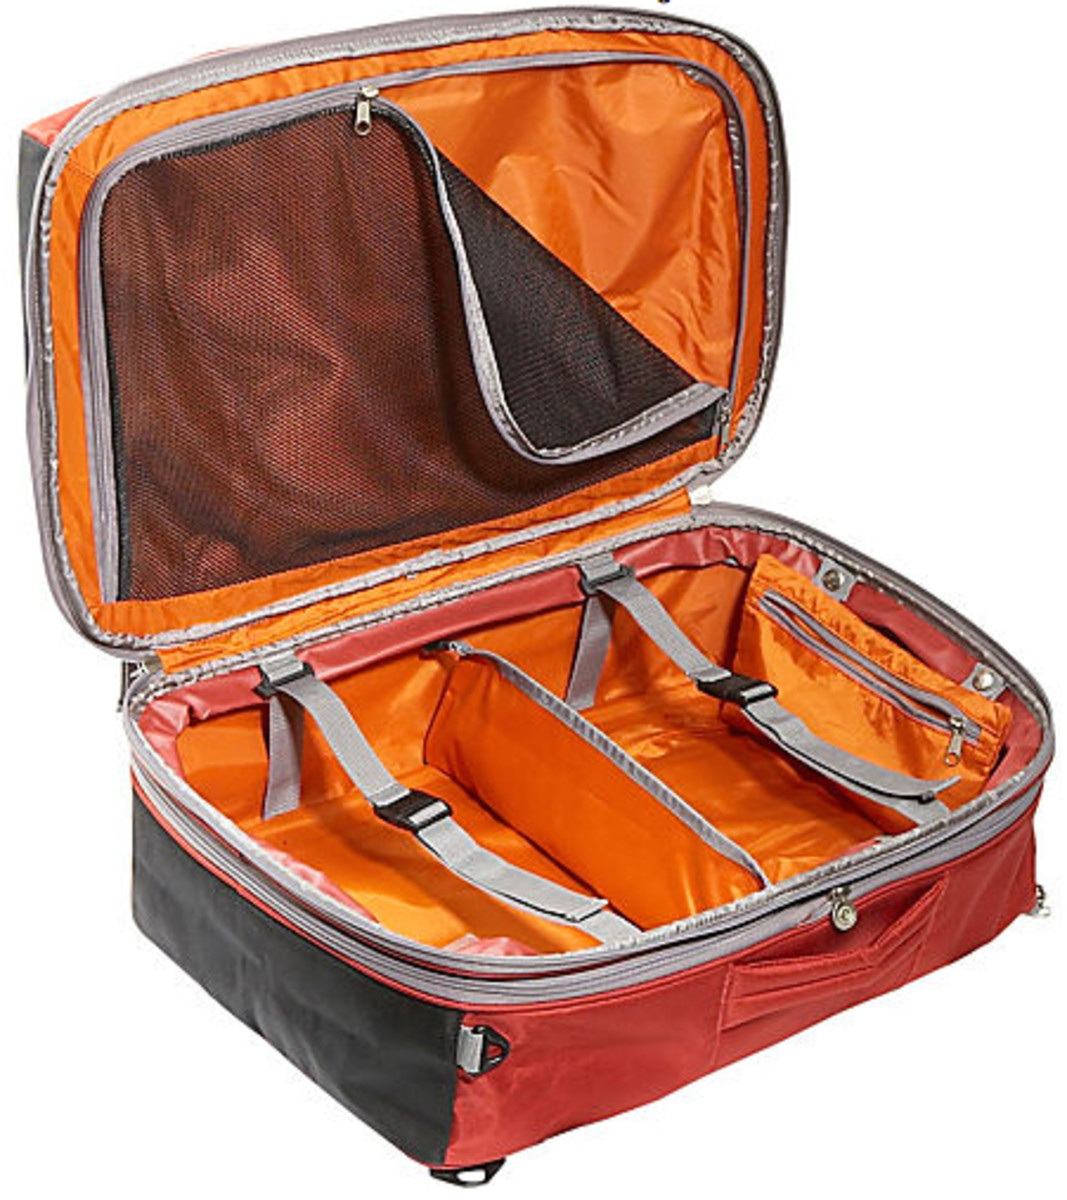 Great Gifts for Travelers: Carry on Bags